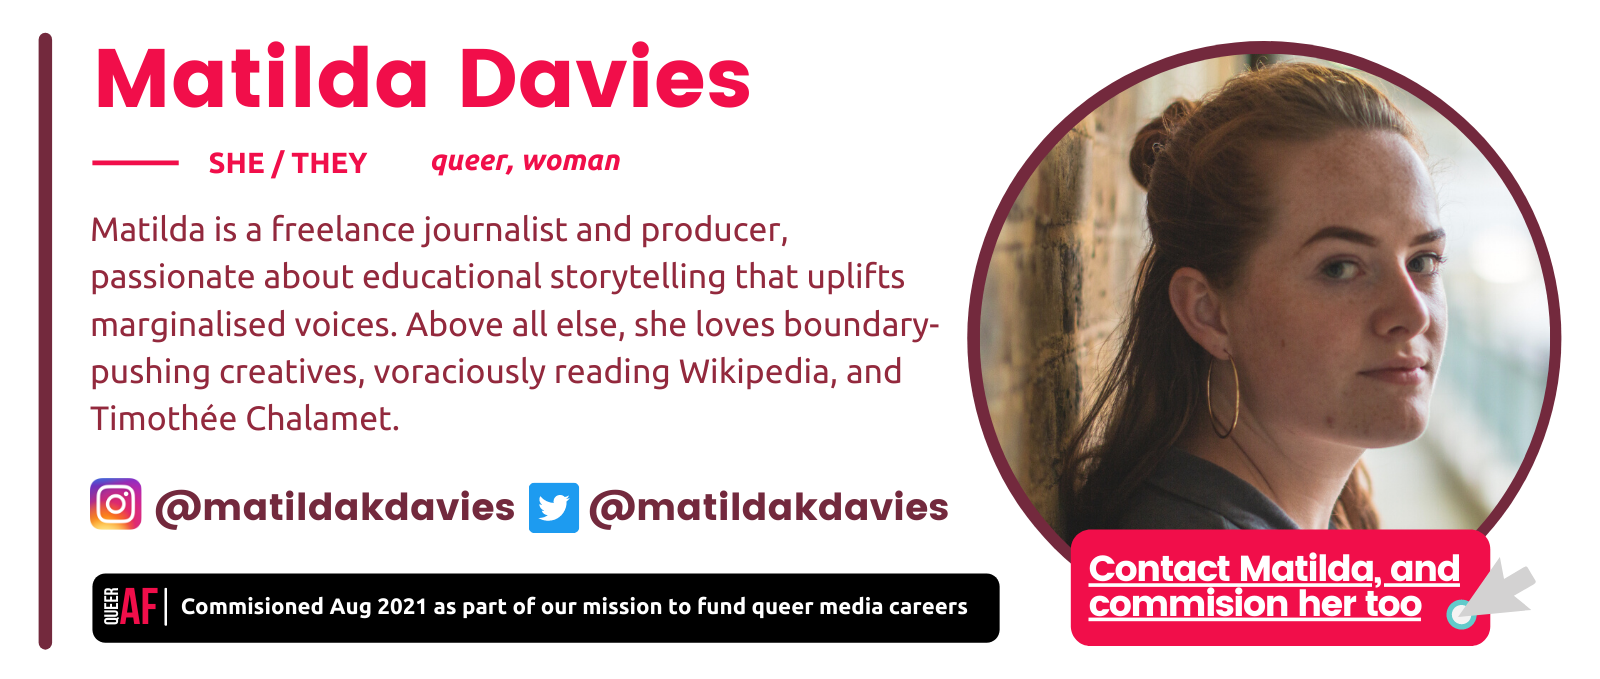 Matilda Davies bio box: She/They. Queer, woman. Commisioned Aud 2021 as part of our mission to fund queer careers